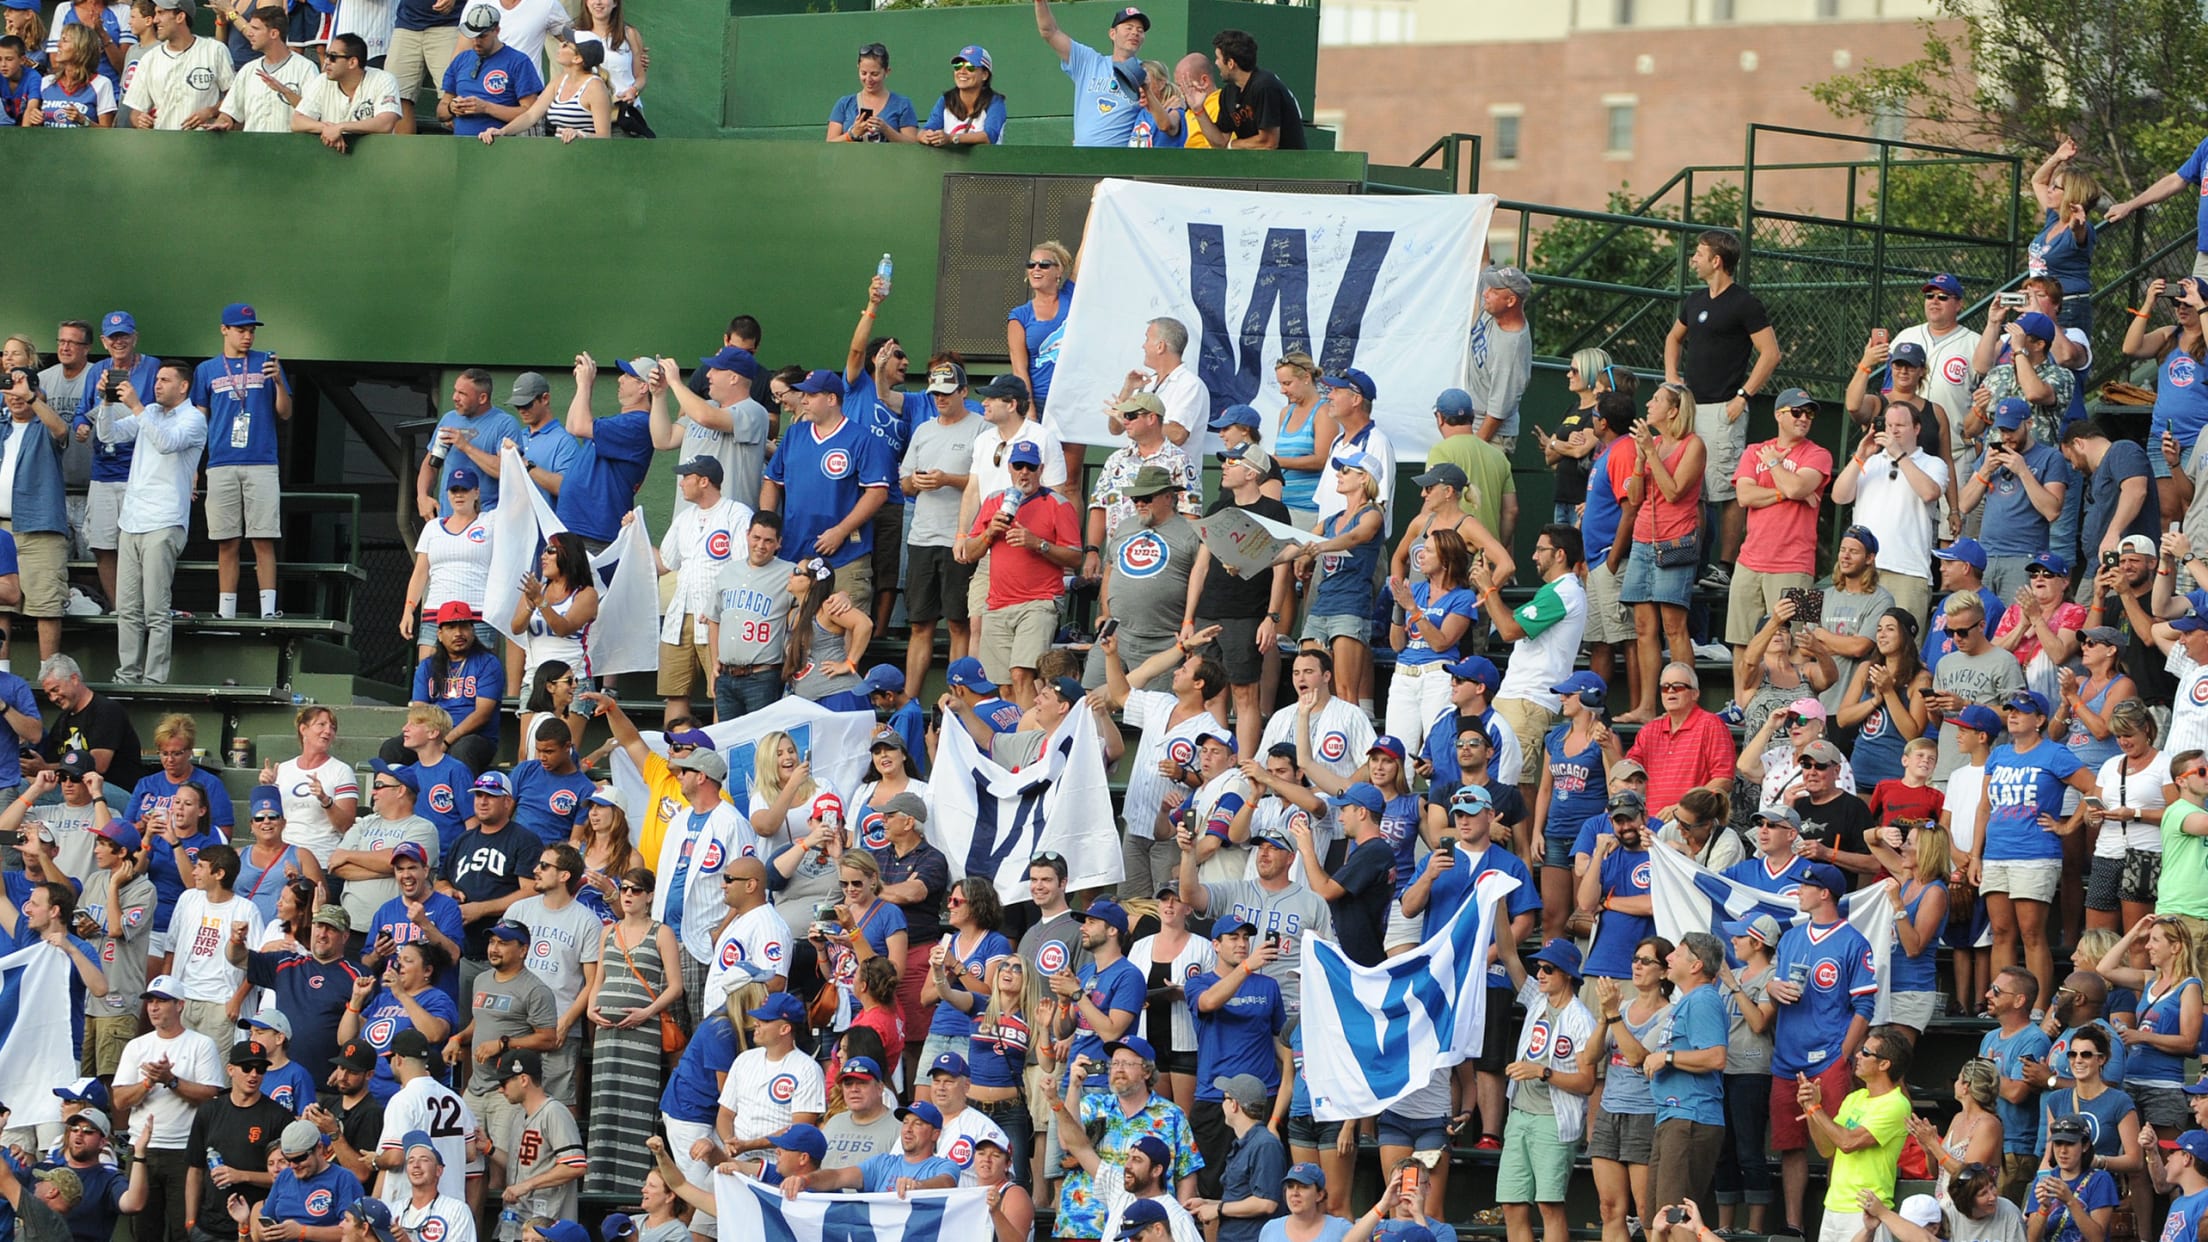 Cubs, fans gear up for Game 3 Monday at Wrigley Field - ABC7 Chicago